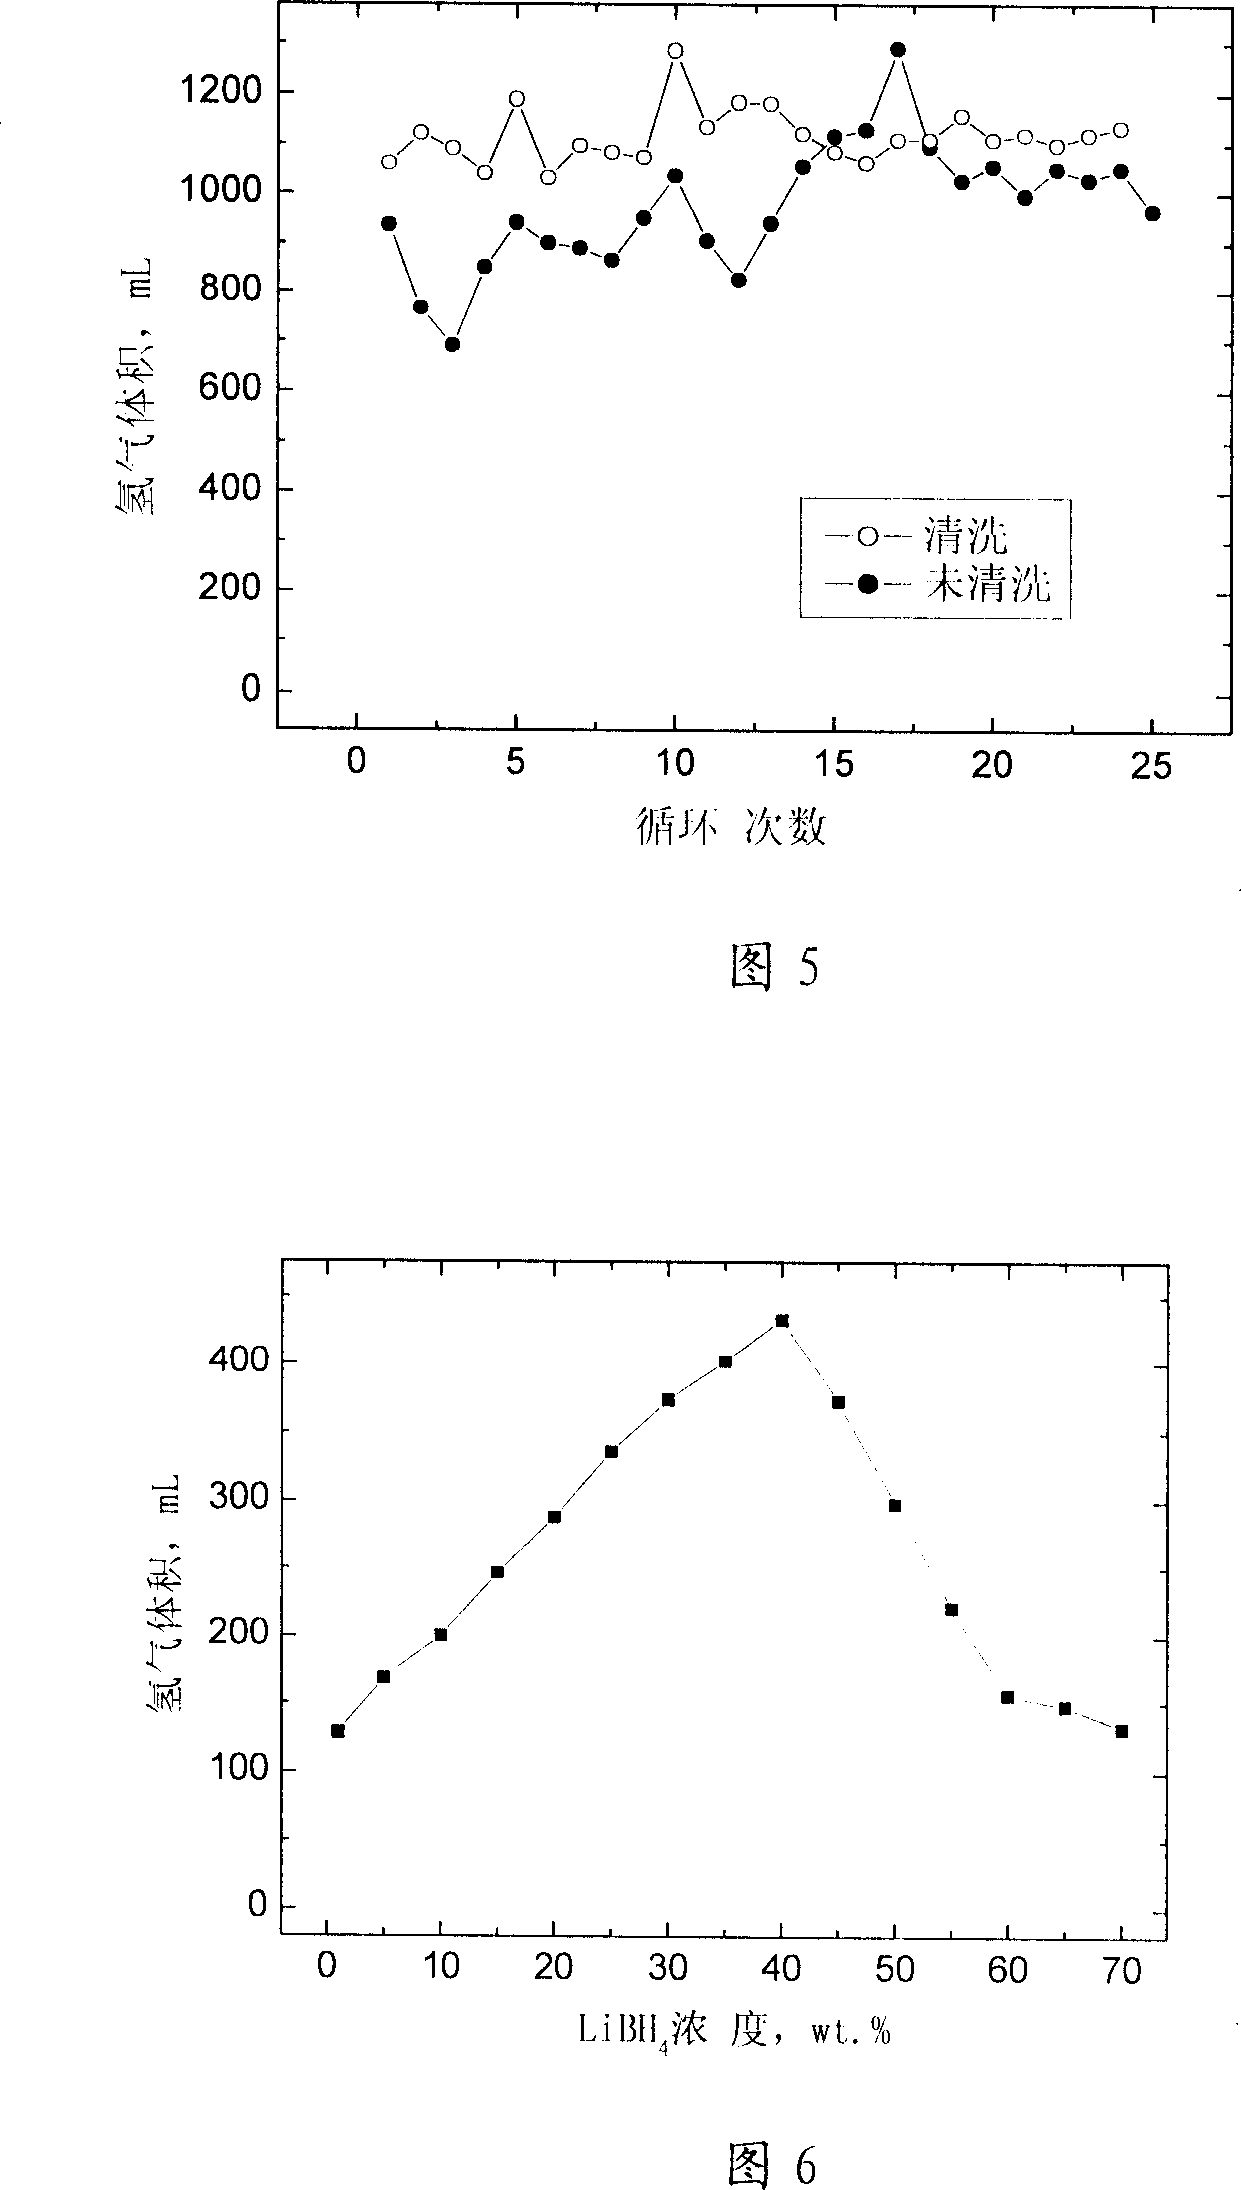 Chemical hydride hydrogen storing material system, hydrogen preparing method and hydrogen preparing device